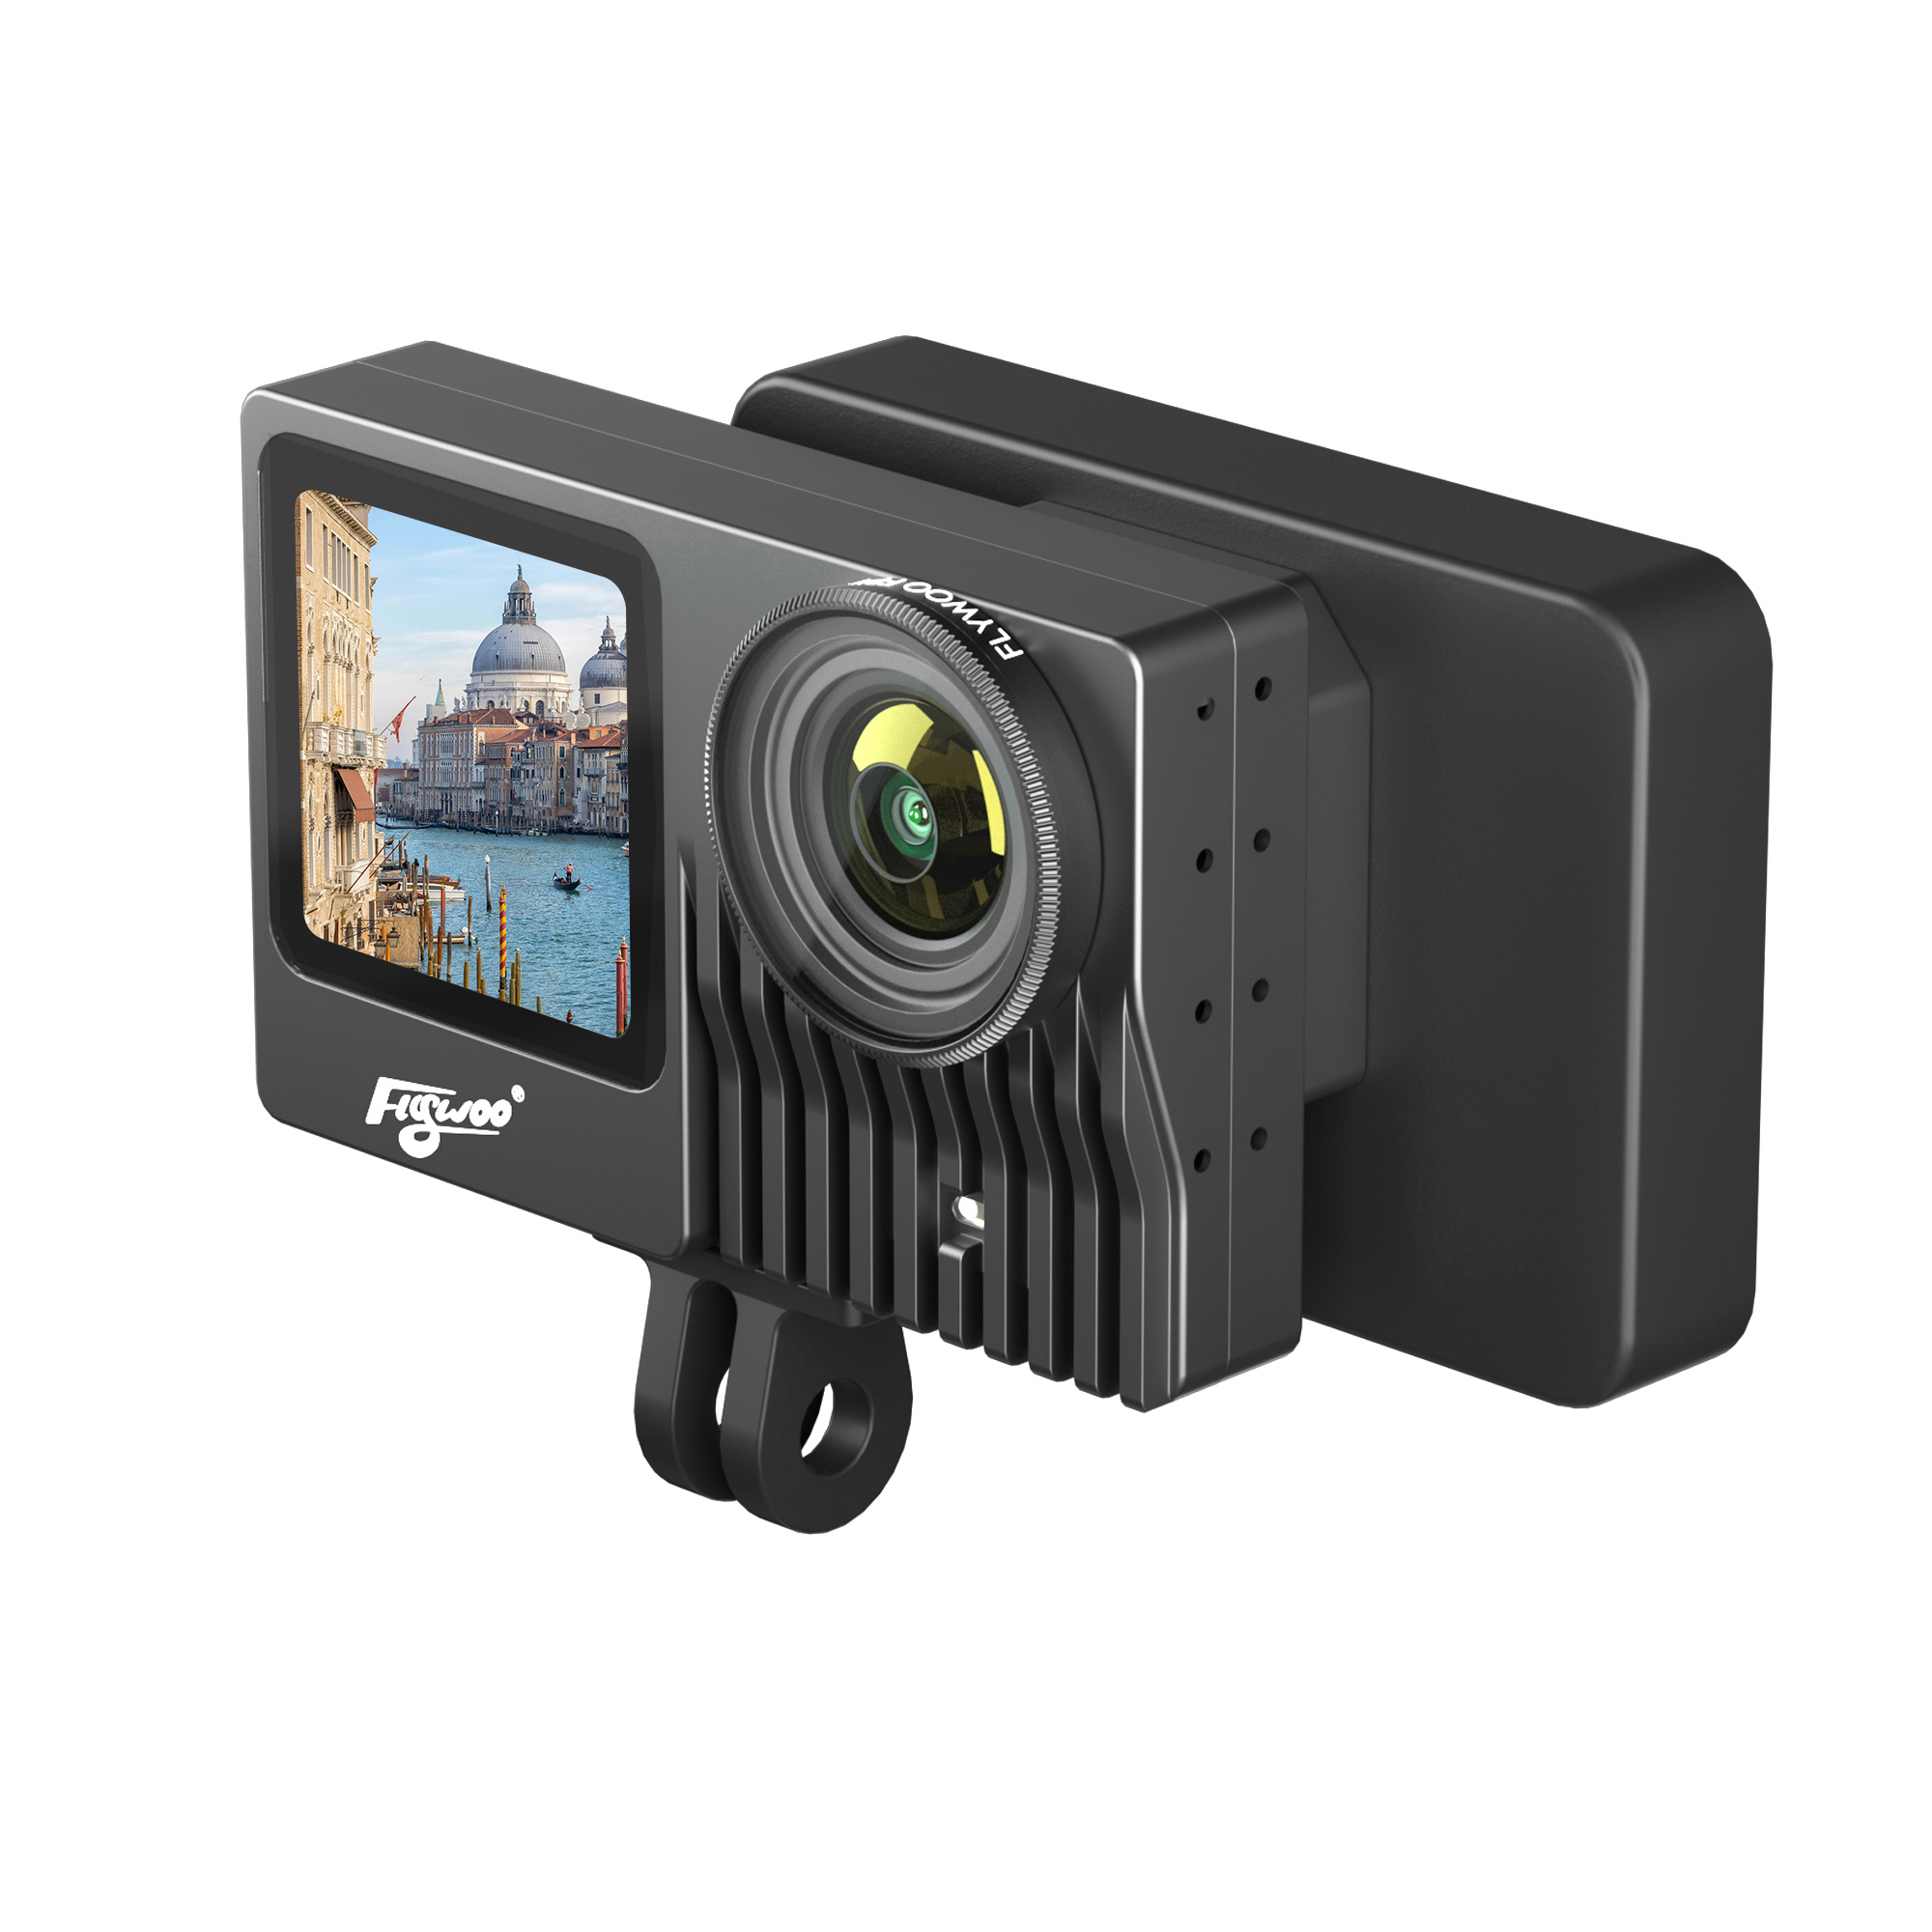 Flywoo Naked Gopro Action Camera 2.0 GP9 / GP10 / GP11 / GP12 Pro w/ touch screen